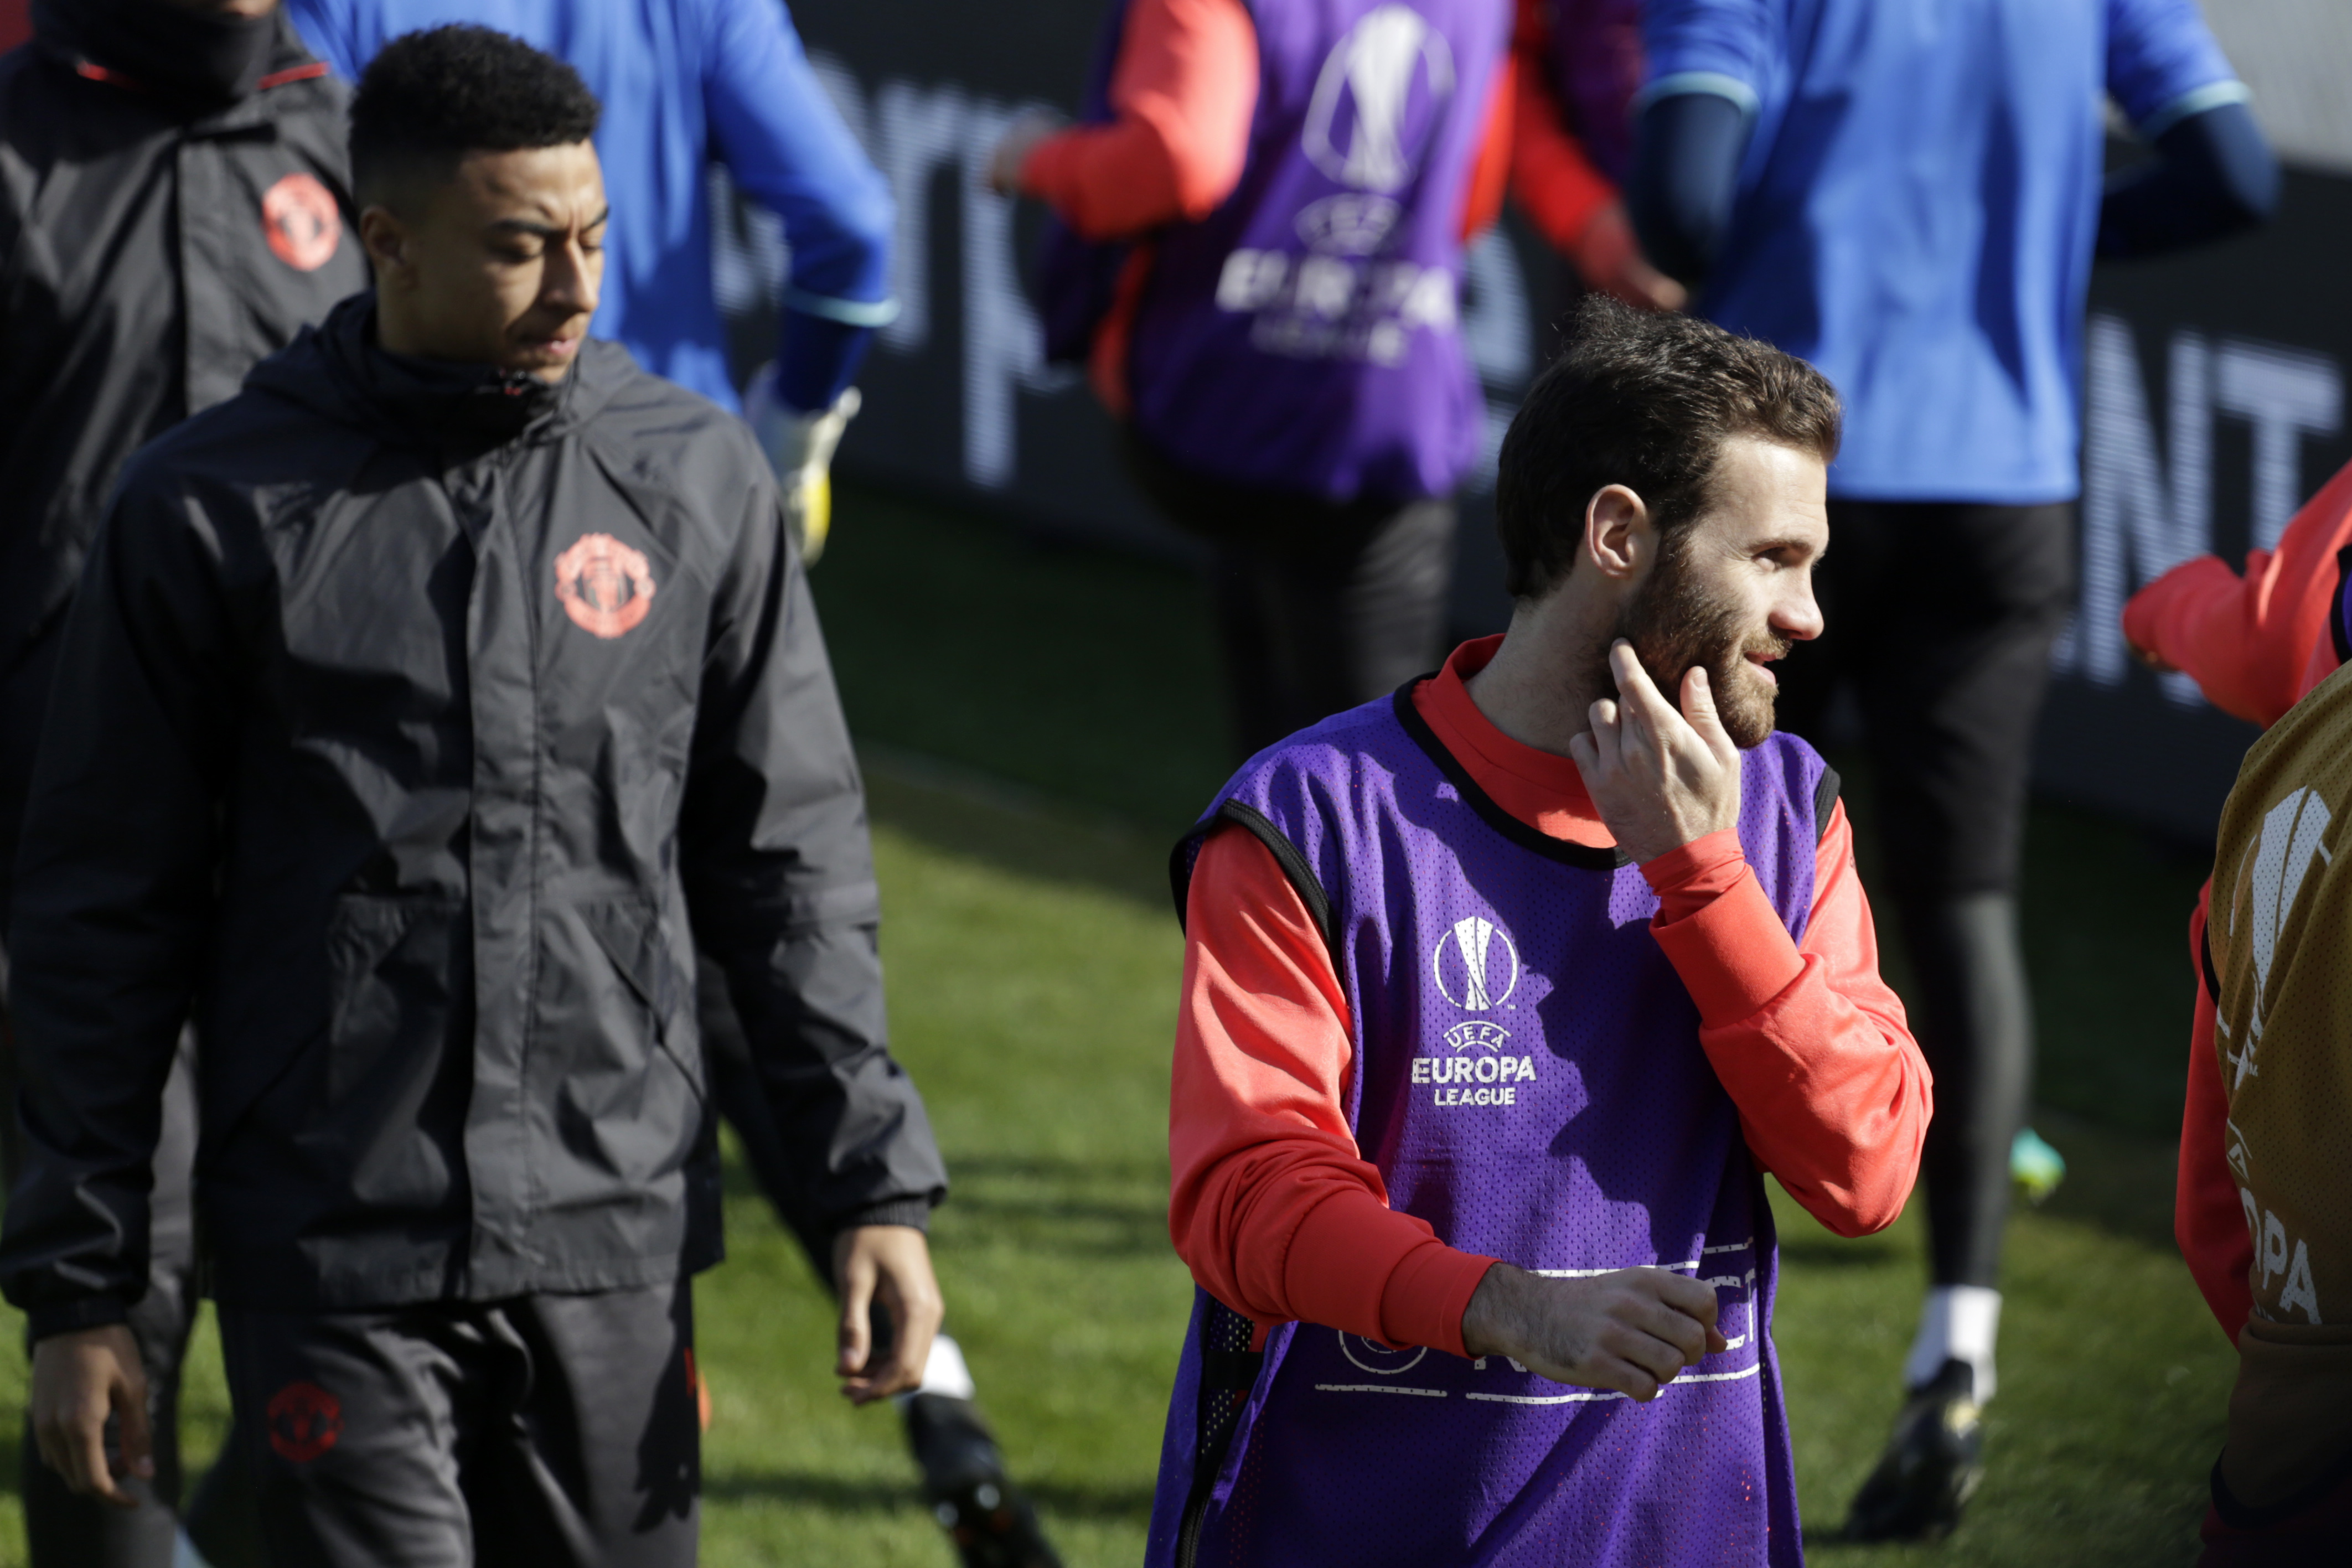 Manchester United's Spanish midfielder Juan Mata (R) takes part in a training session on the eve of the UEFA Europe League round of 16, first leg match between FC Rostov and Manchester United in Rostov on March 8, 2017. / AFP PHOTO / Yuri MALTSEV        (Photo credit should read YURI MALTSEV/AFP/Getty Images)